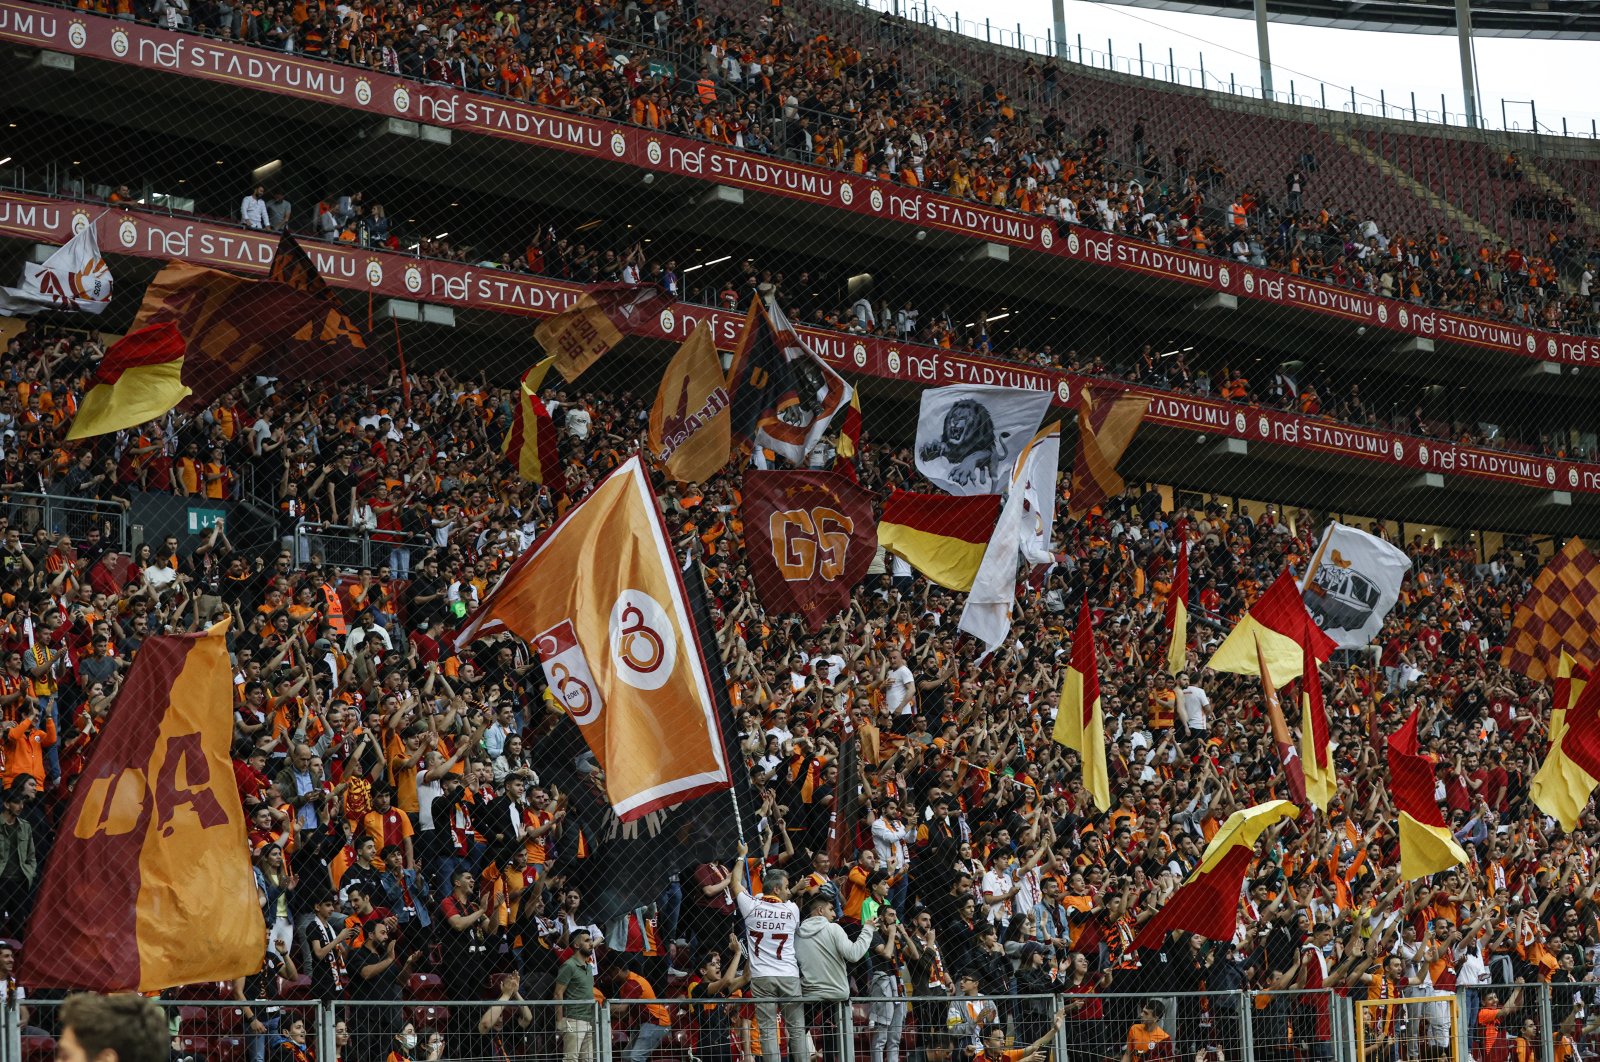 Galatasaray fans cheer during a match against Adana Demirspor, in Istanbul, Turkey, May 16, 2022. (AA PHOTO)